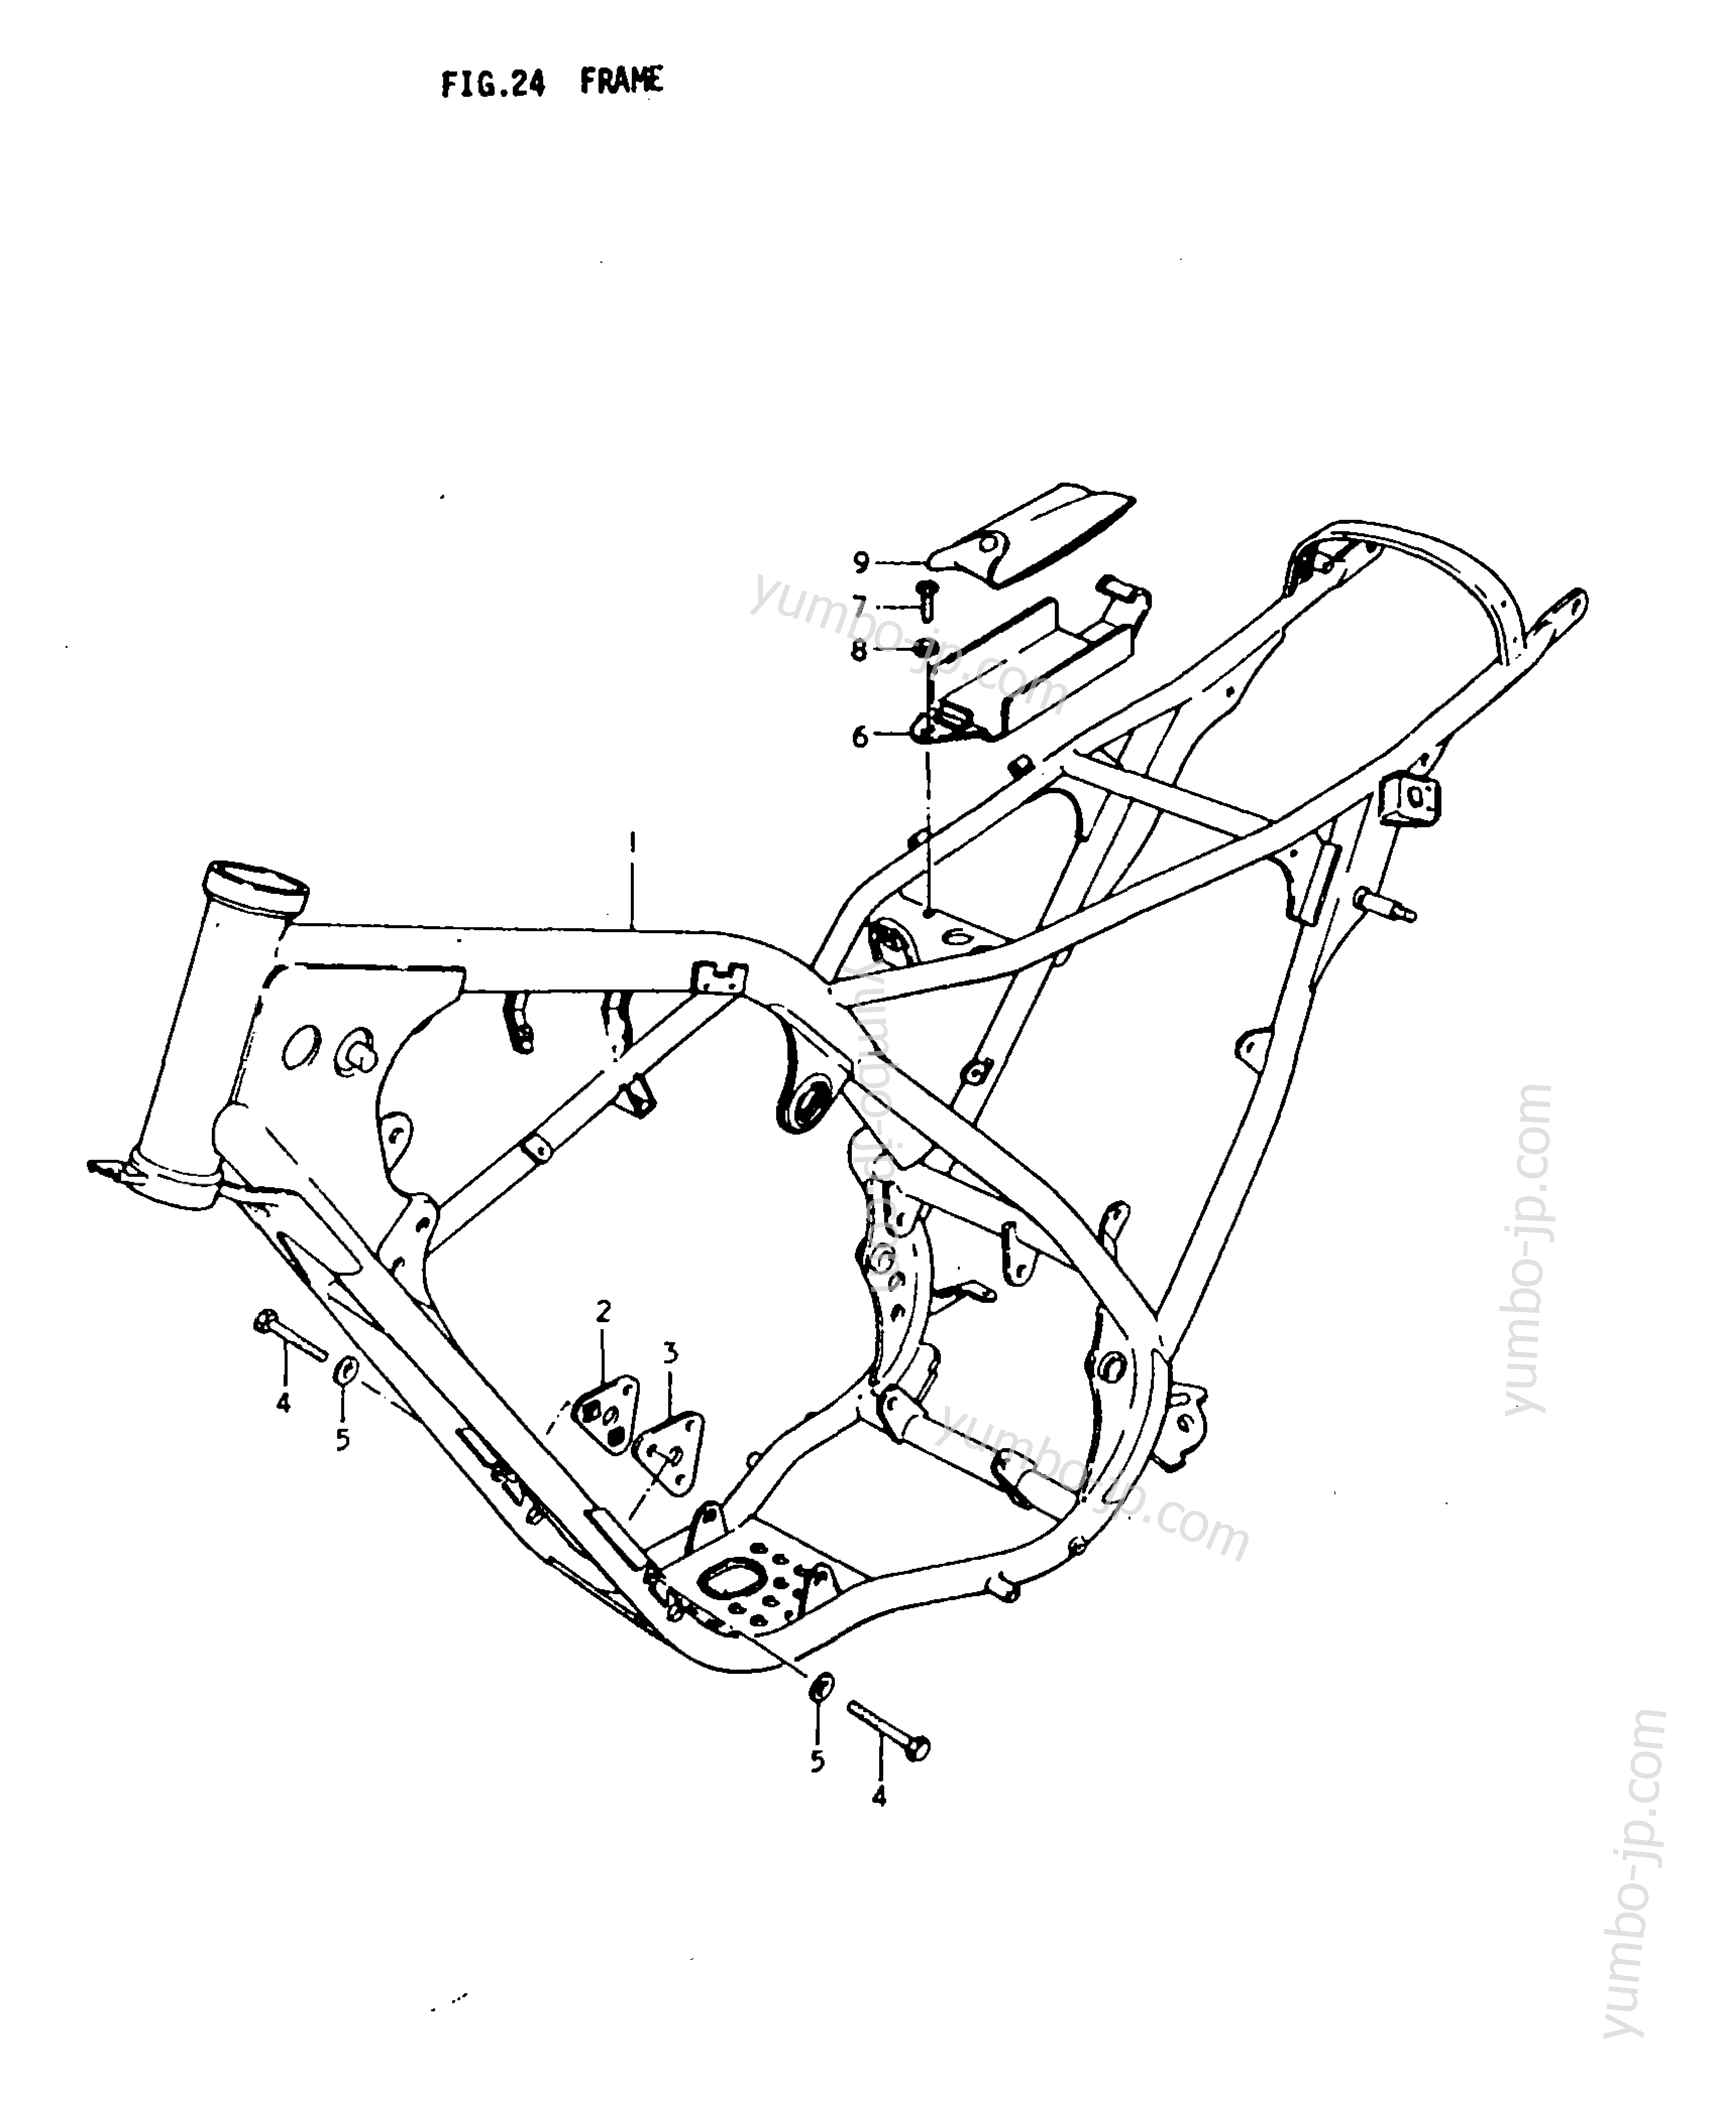 FRAME for motorcycles SUZUKI TS250 1979 year